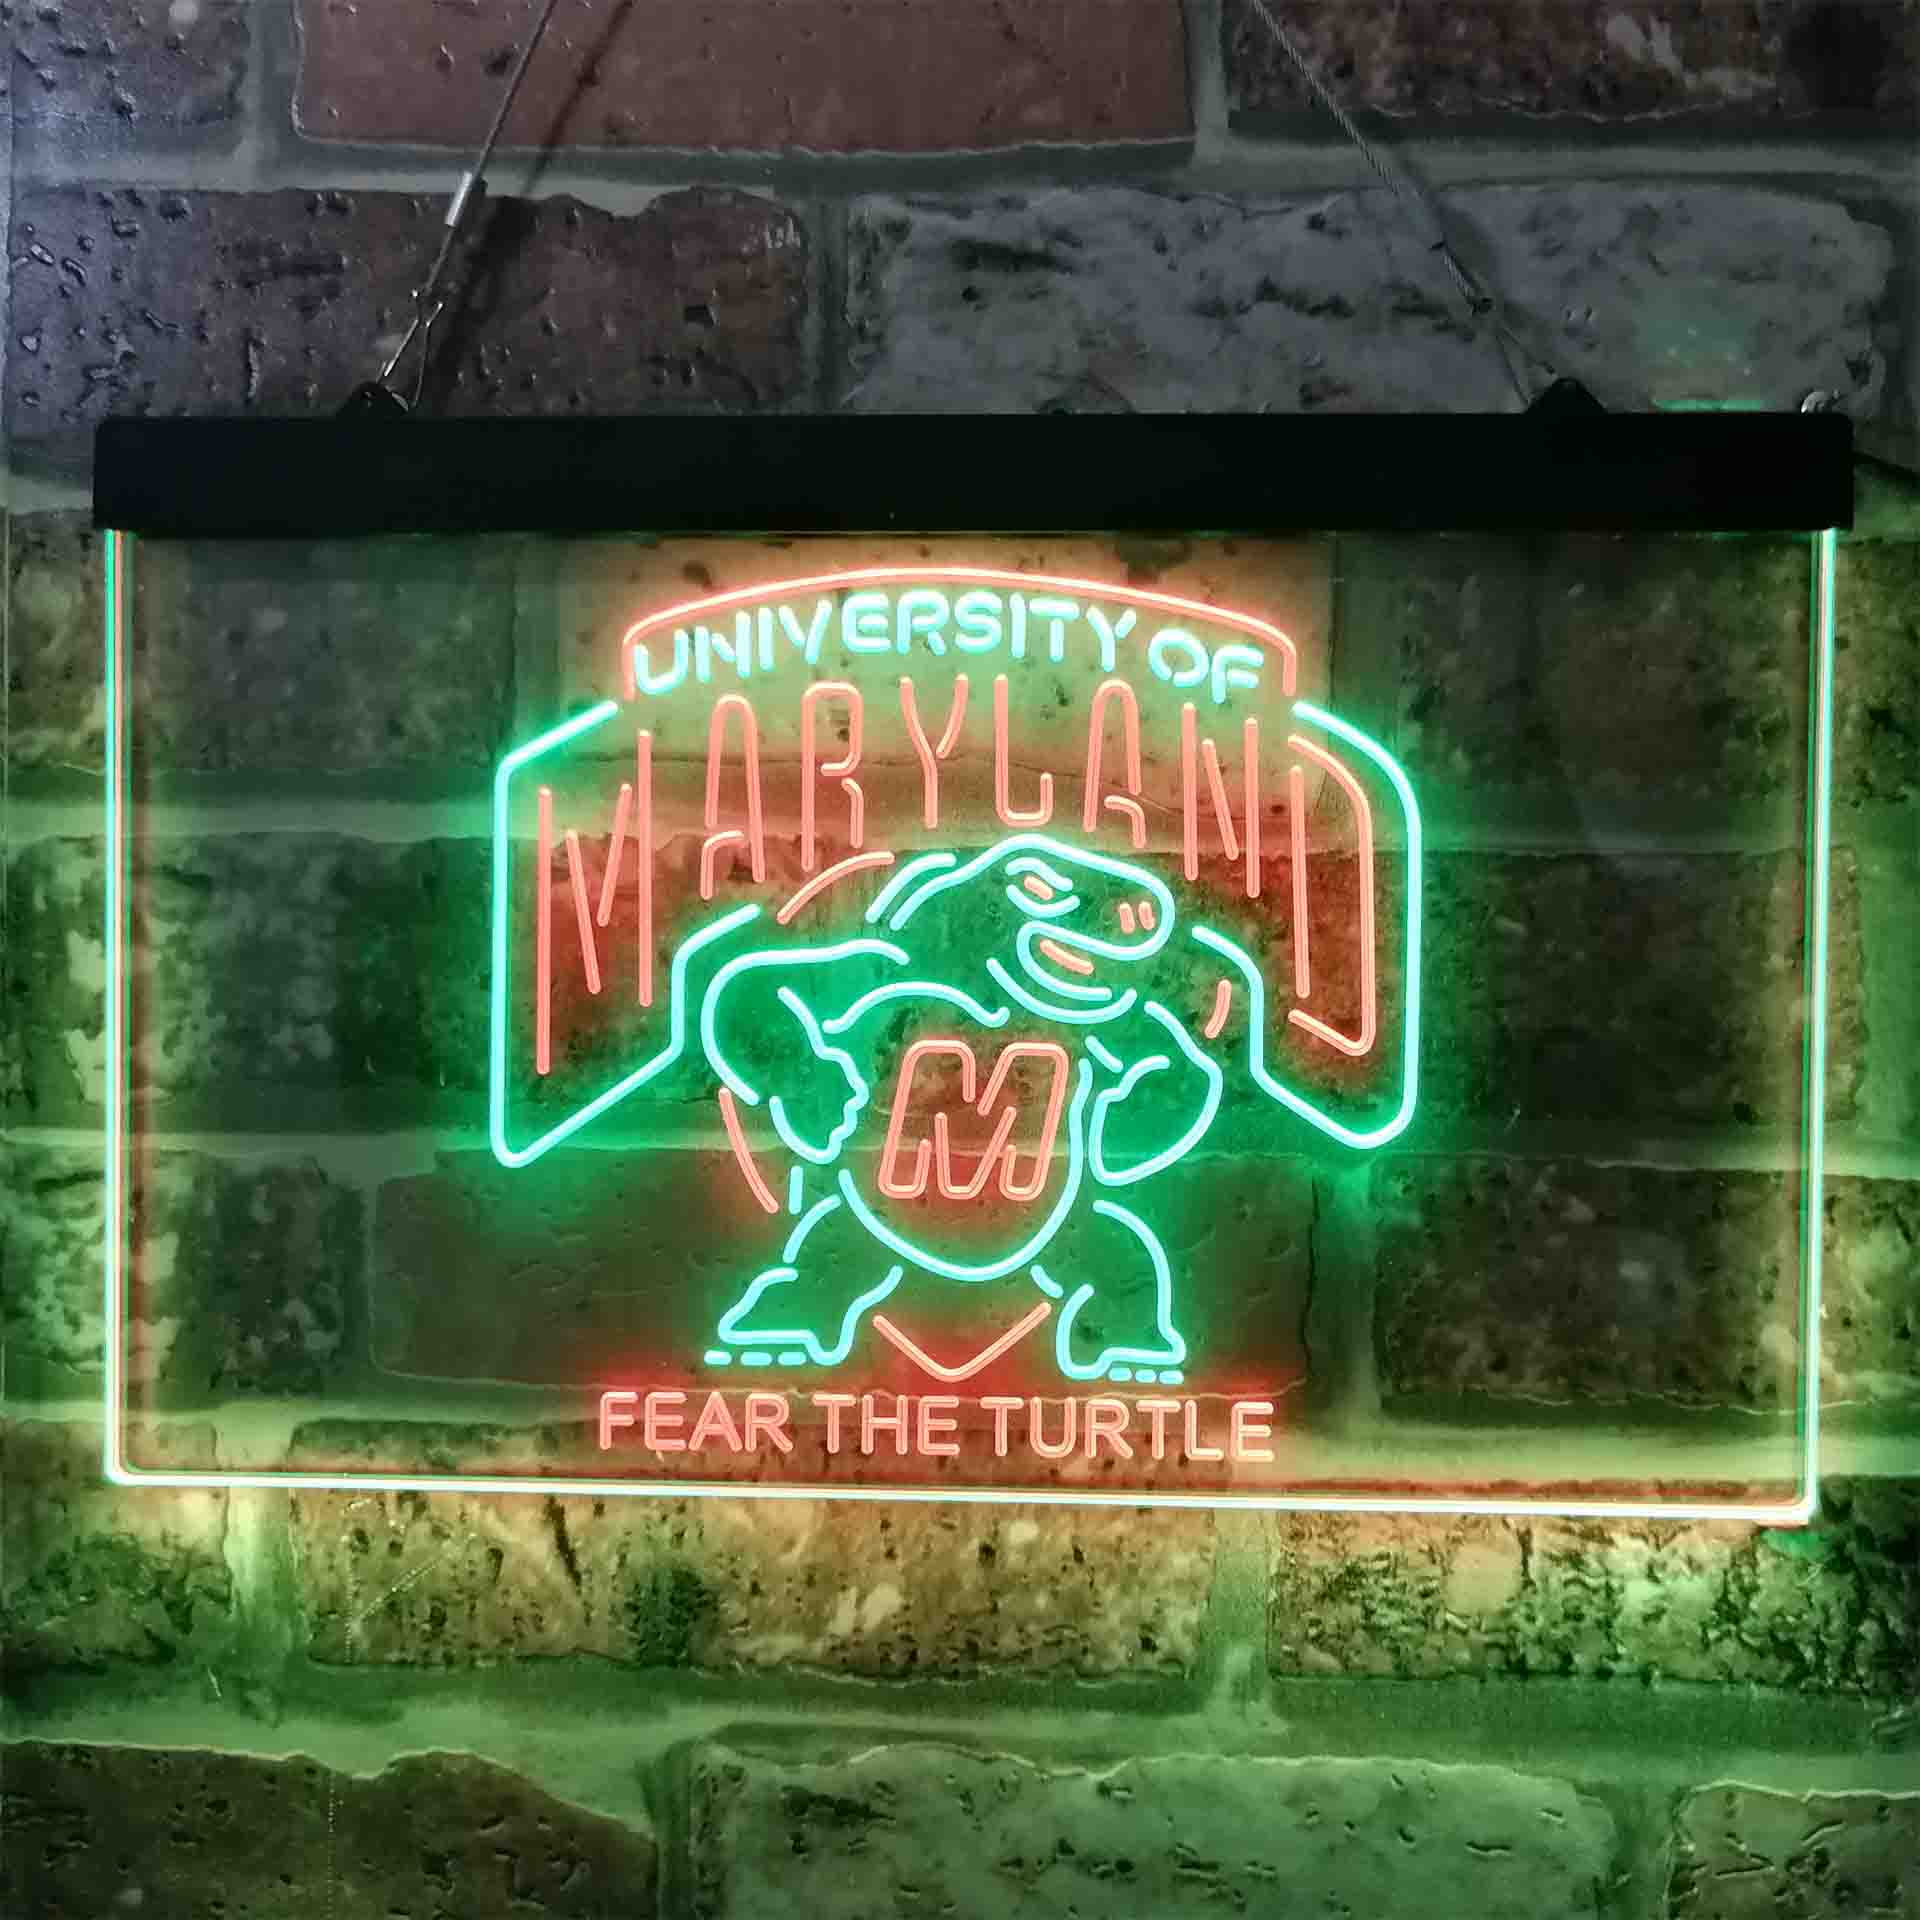 Maryland Turtle University NCAA College Football Fear The Turtle LED Neon Sign